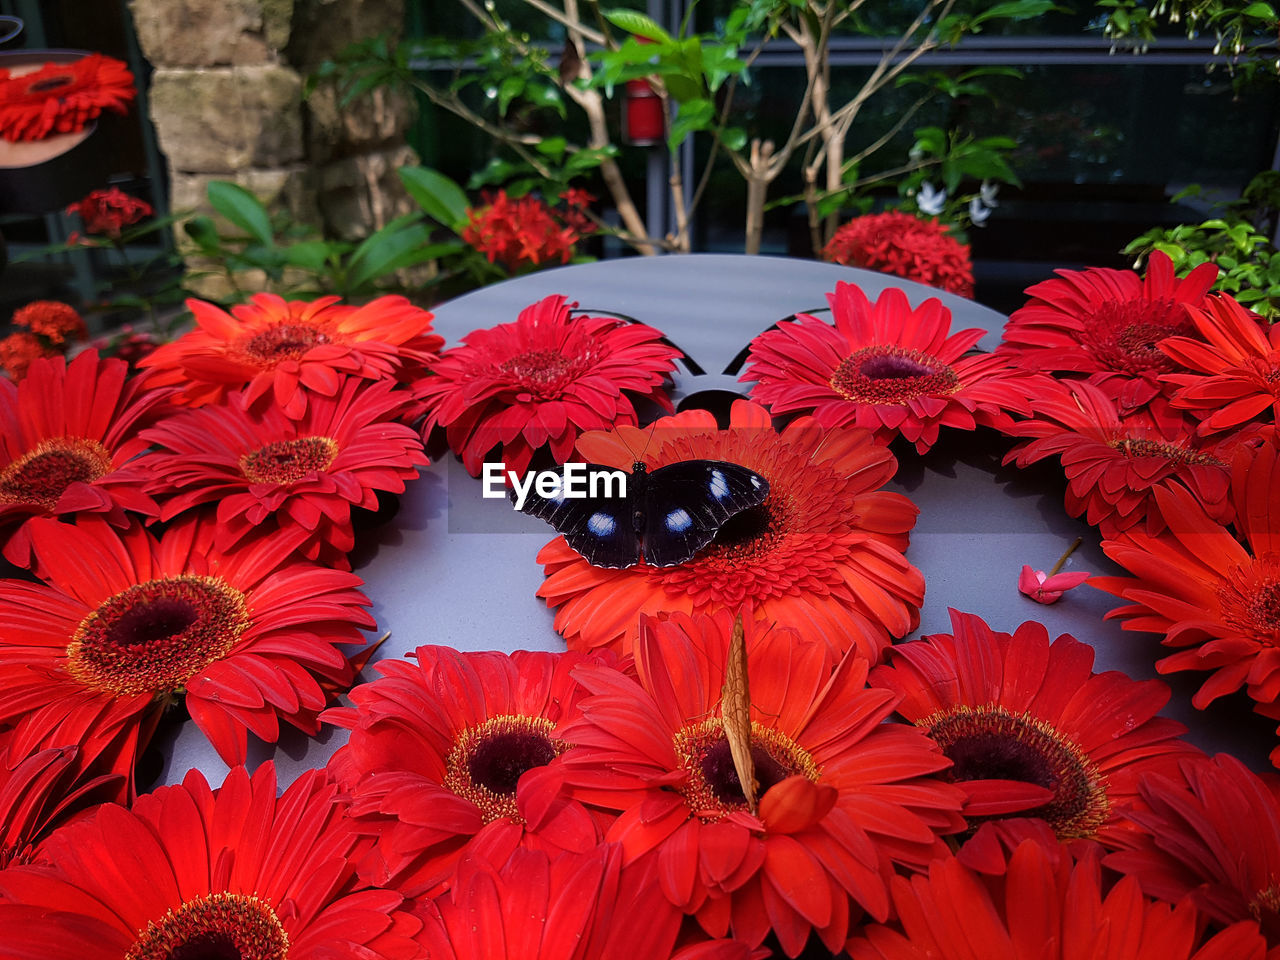 Great eggly butterfly, also known as the blue moon butterfly, among red gerbera daisies.